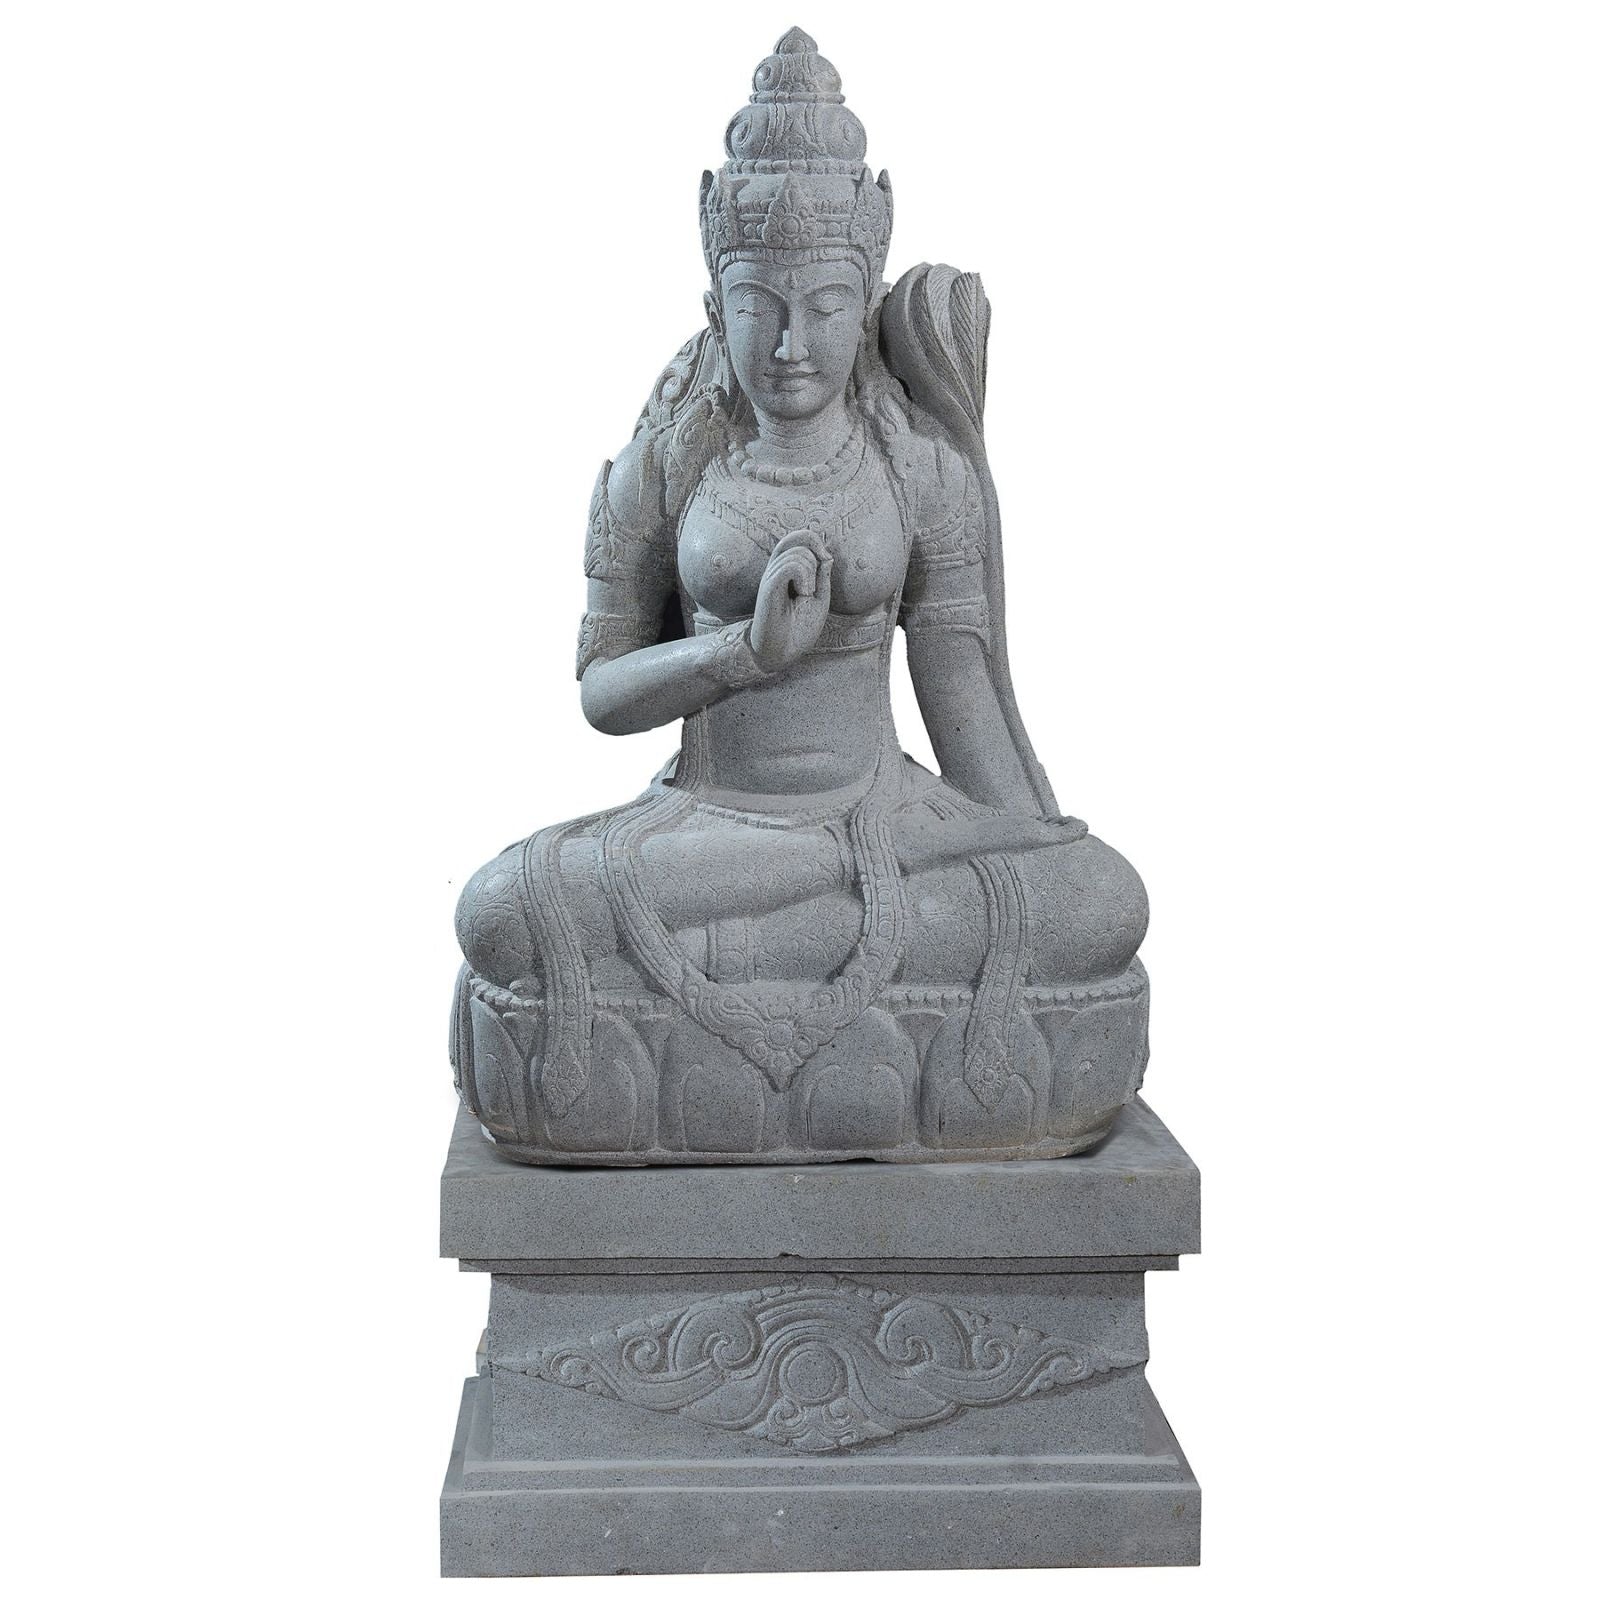 Large garden Stone statue of sitting Dewi Sri - Goddess of the earth